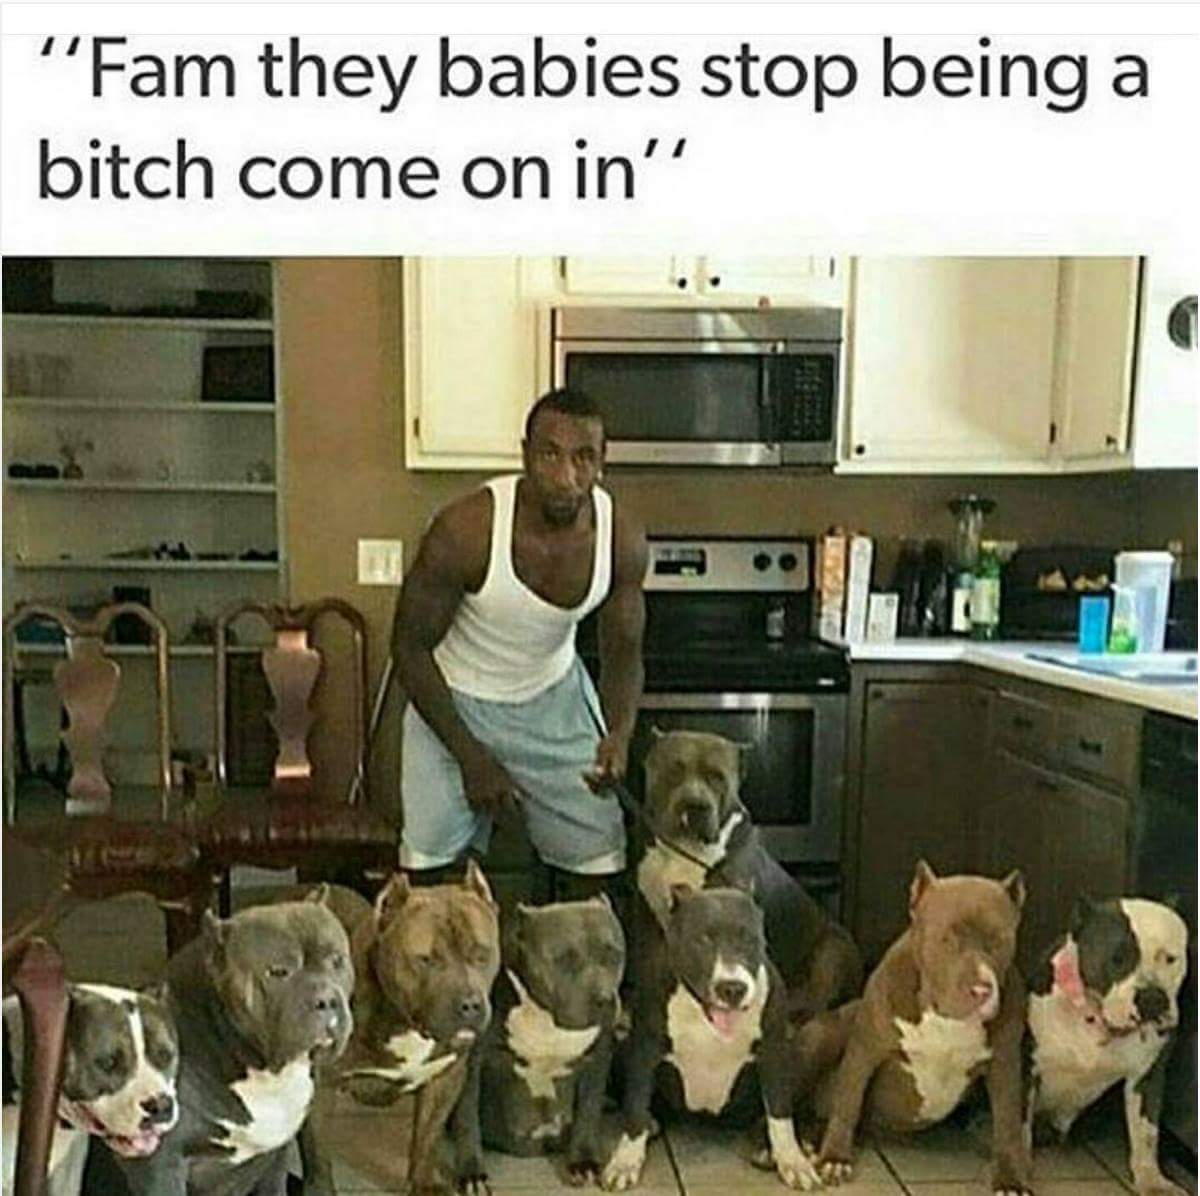 meme stream - pitbulls are misunderstood - "Fam they babies stop being a bitch come on in'